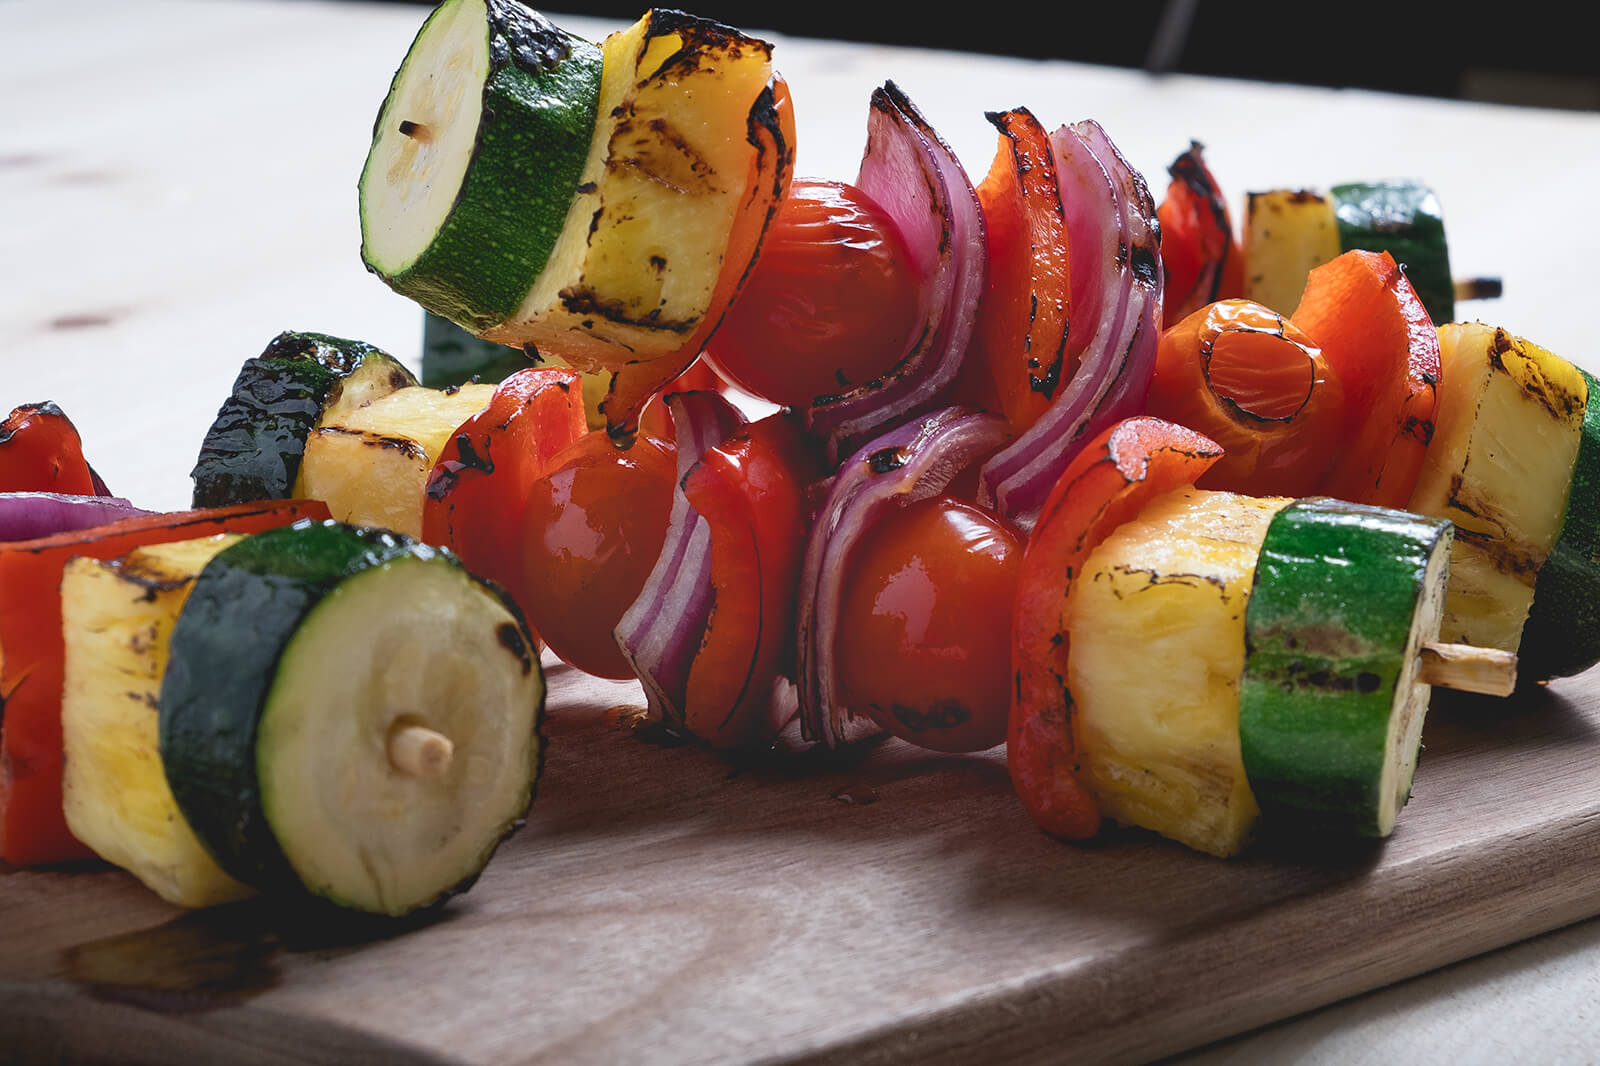 Add some excitement to traditional fruit and veggies, get them seasoned and sizzling on the grill! These colourful kabobs are a guaranteed hit.